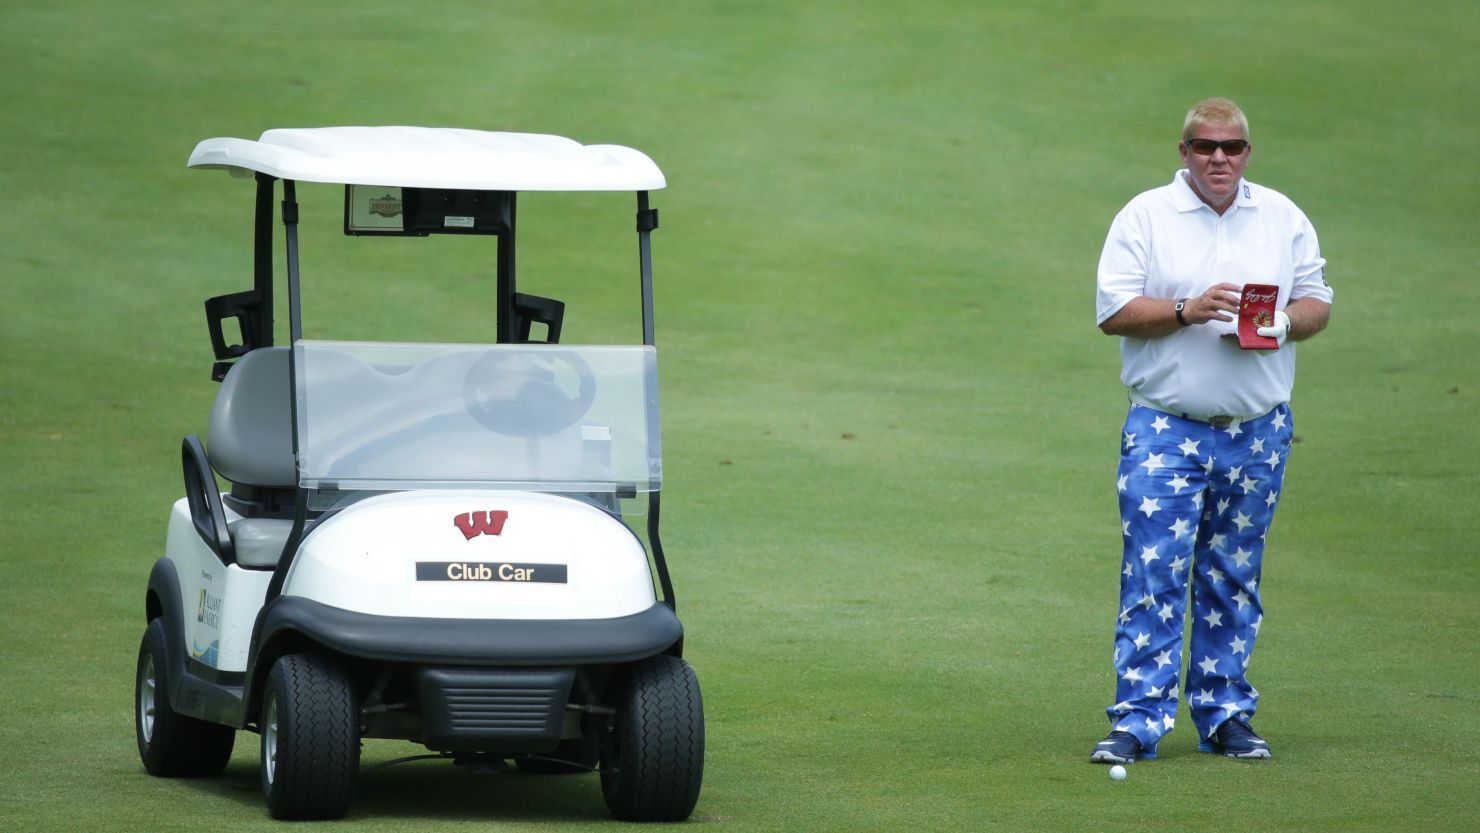 John Daly has been approved to use a golf cart at the PGA Championship at Bethpage Black next week.